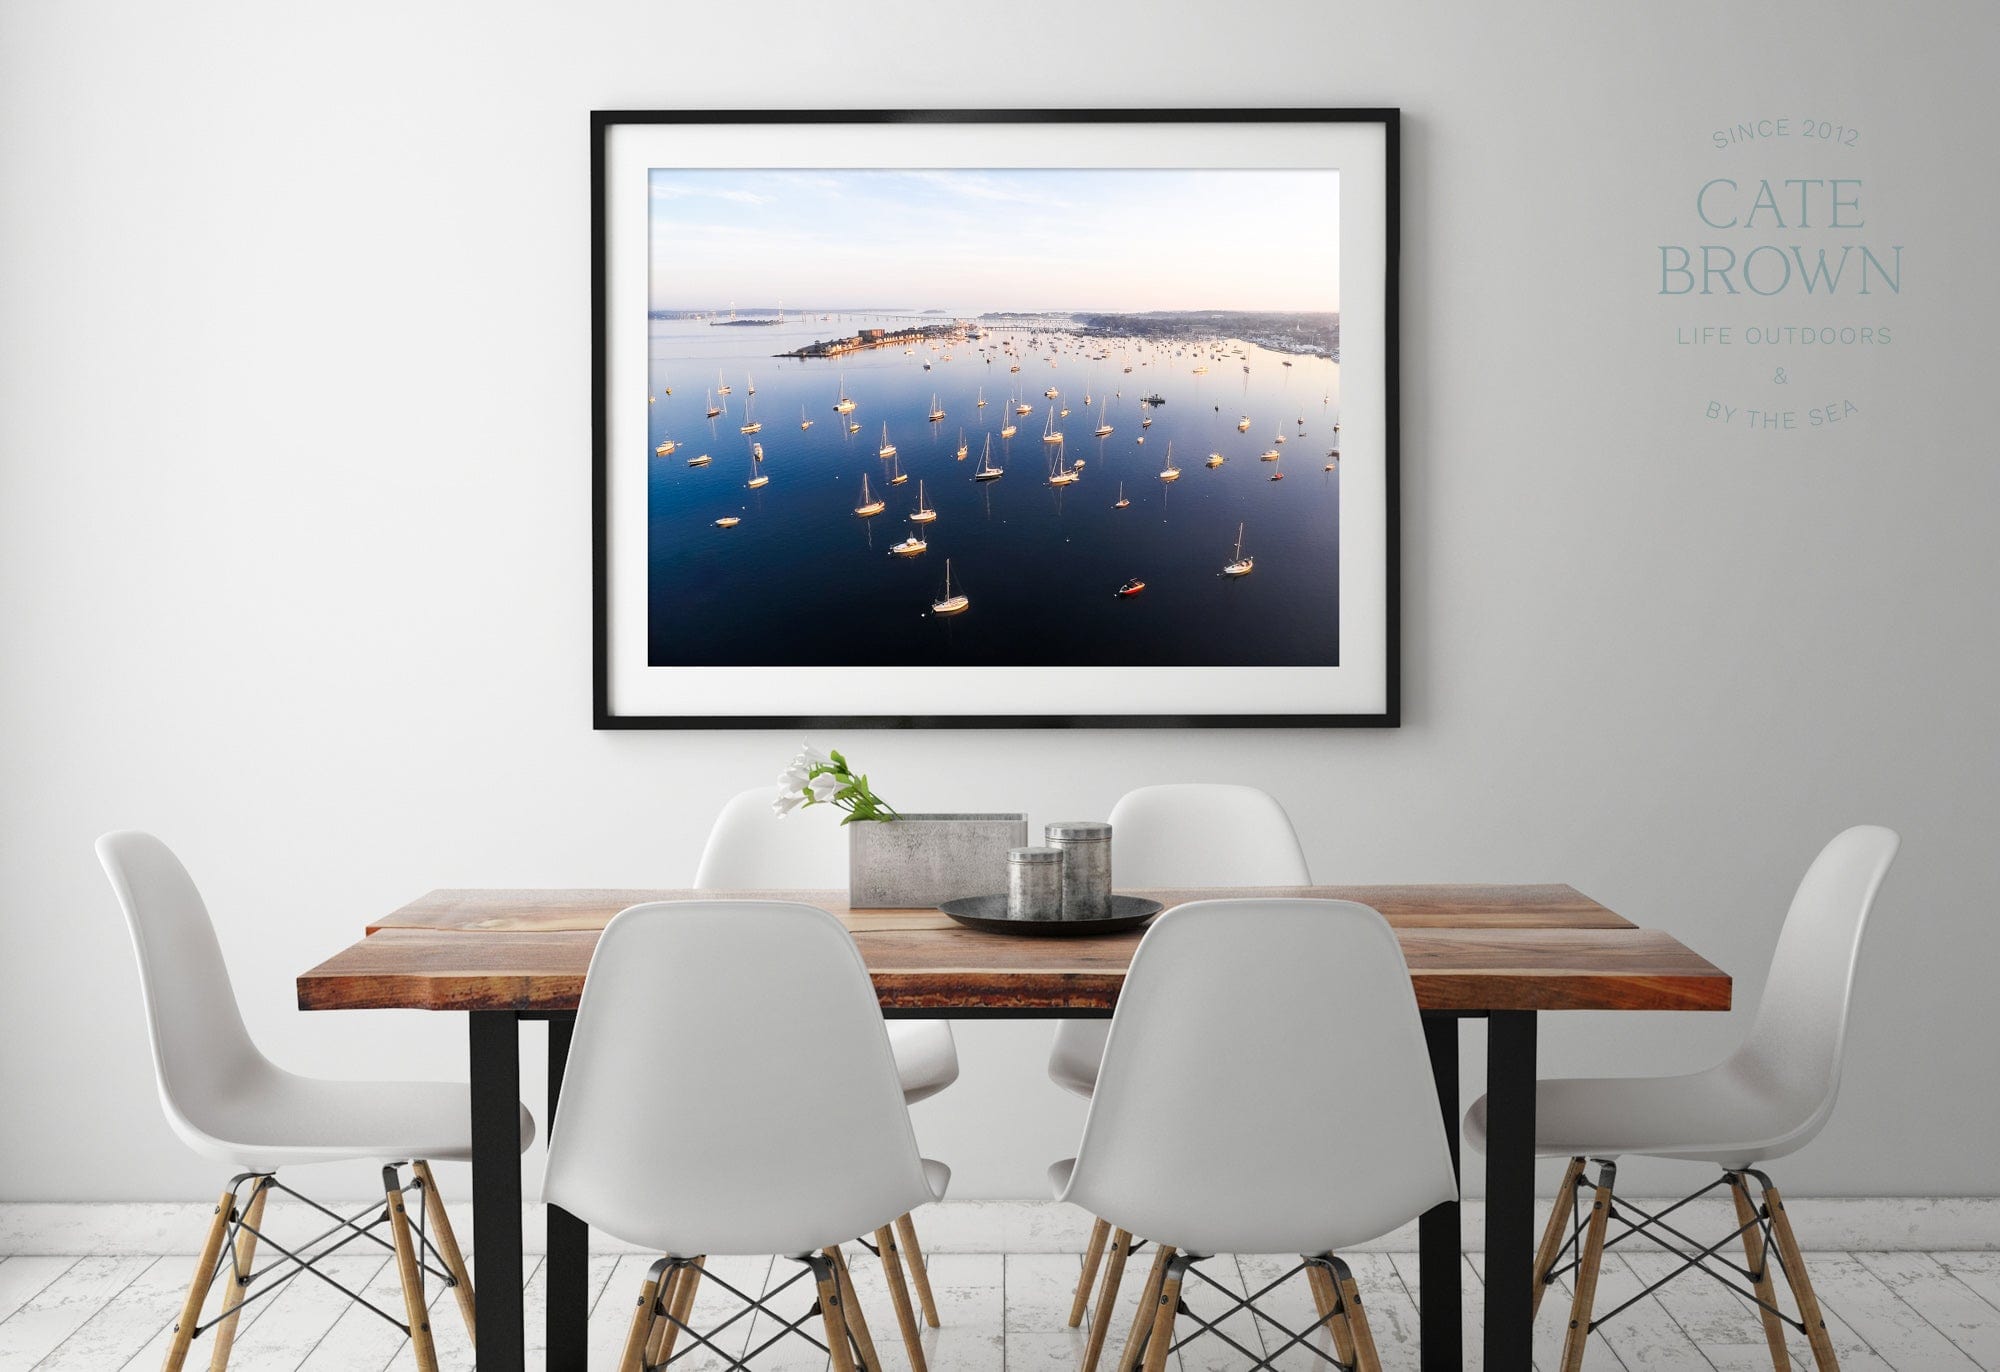 Cate Brown Photo Fine Art Print / 8"x12" / None (Print Only) Newport Harbor at Sunrise  //  Aerial Photography Made to Order Ocean Fine Art